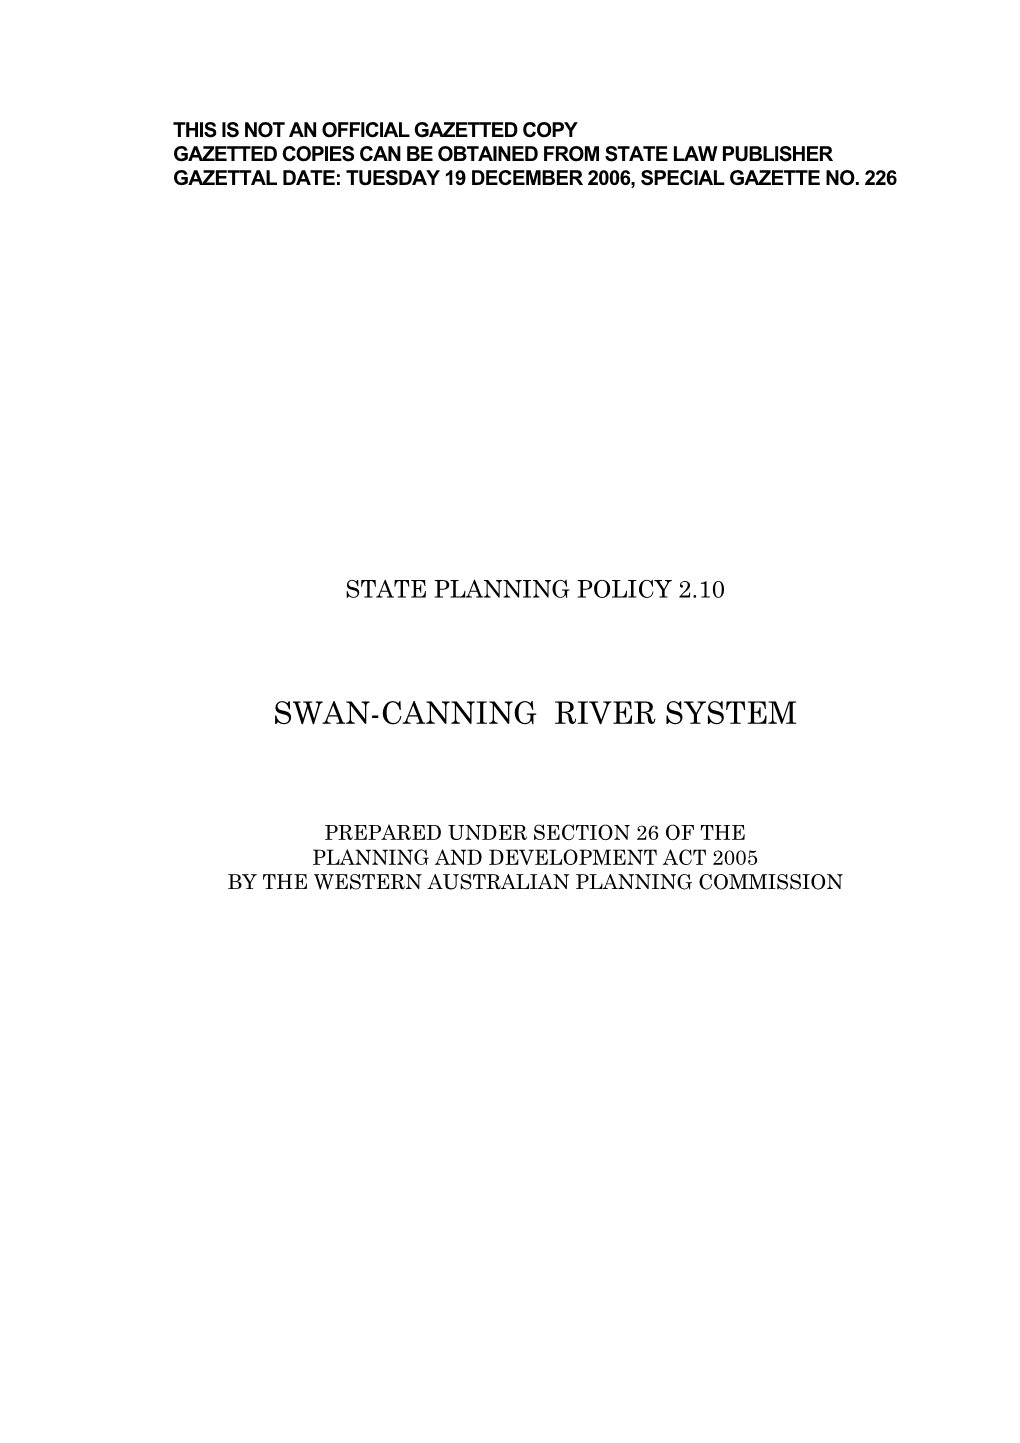 State Planning Policy 2.10 Swan-Canning River System